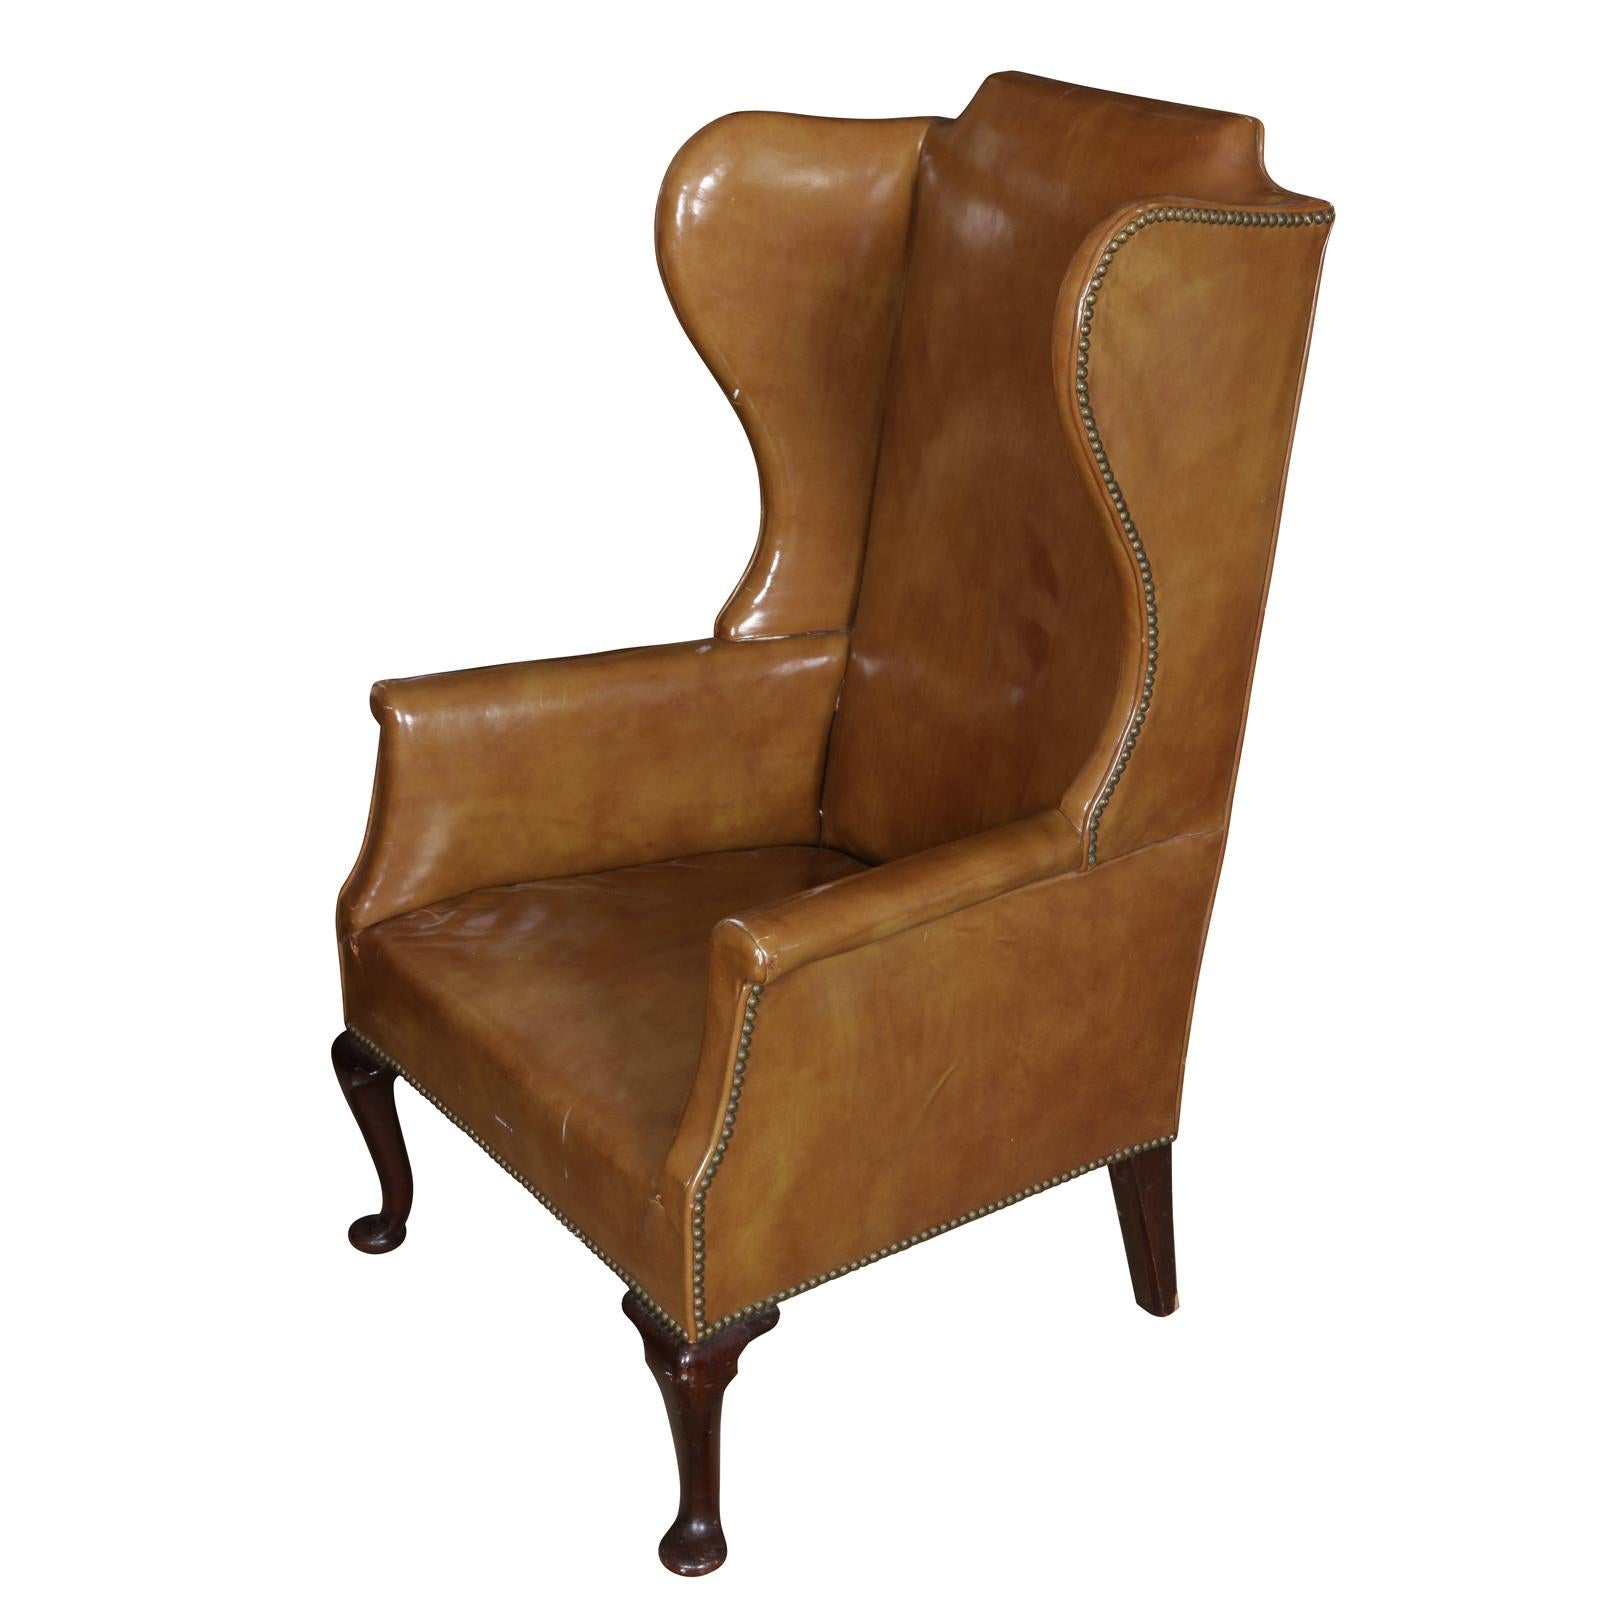 Queen Anne style light brown leather wing chair with nailhead trim, dark wood legs and narrow arms.